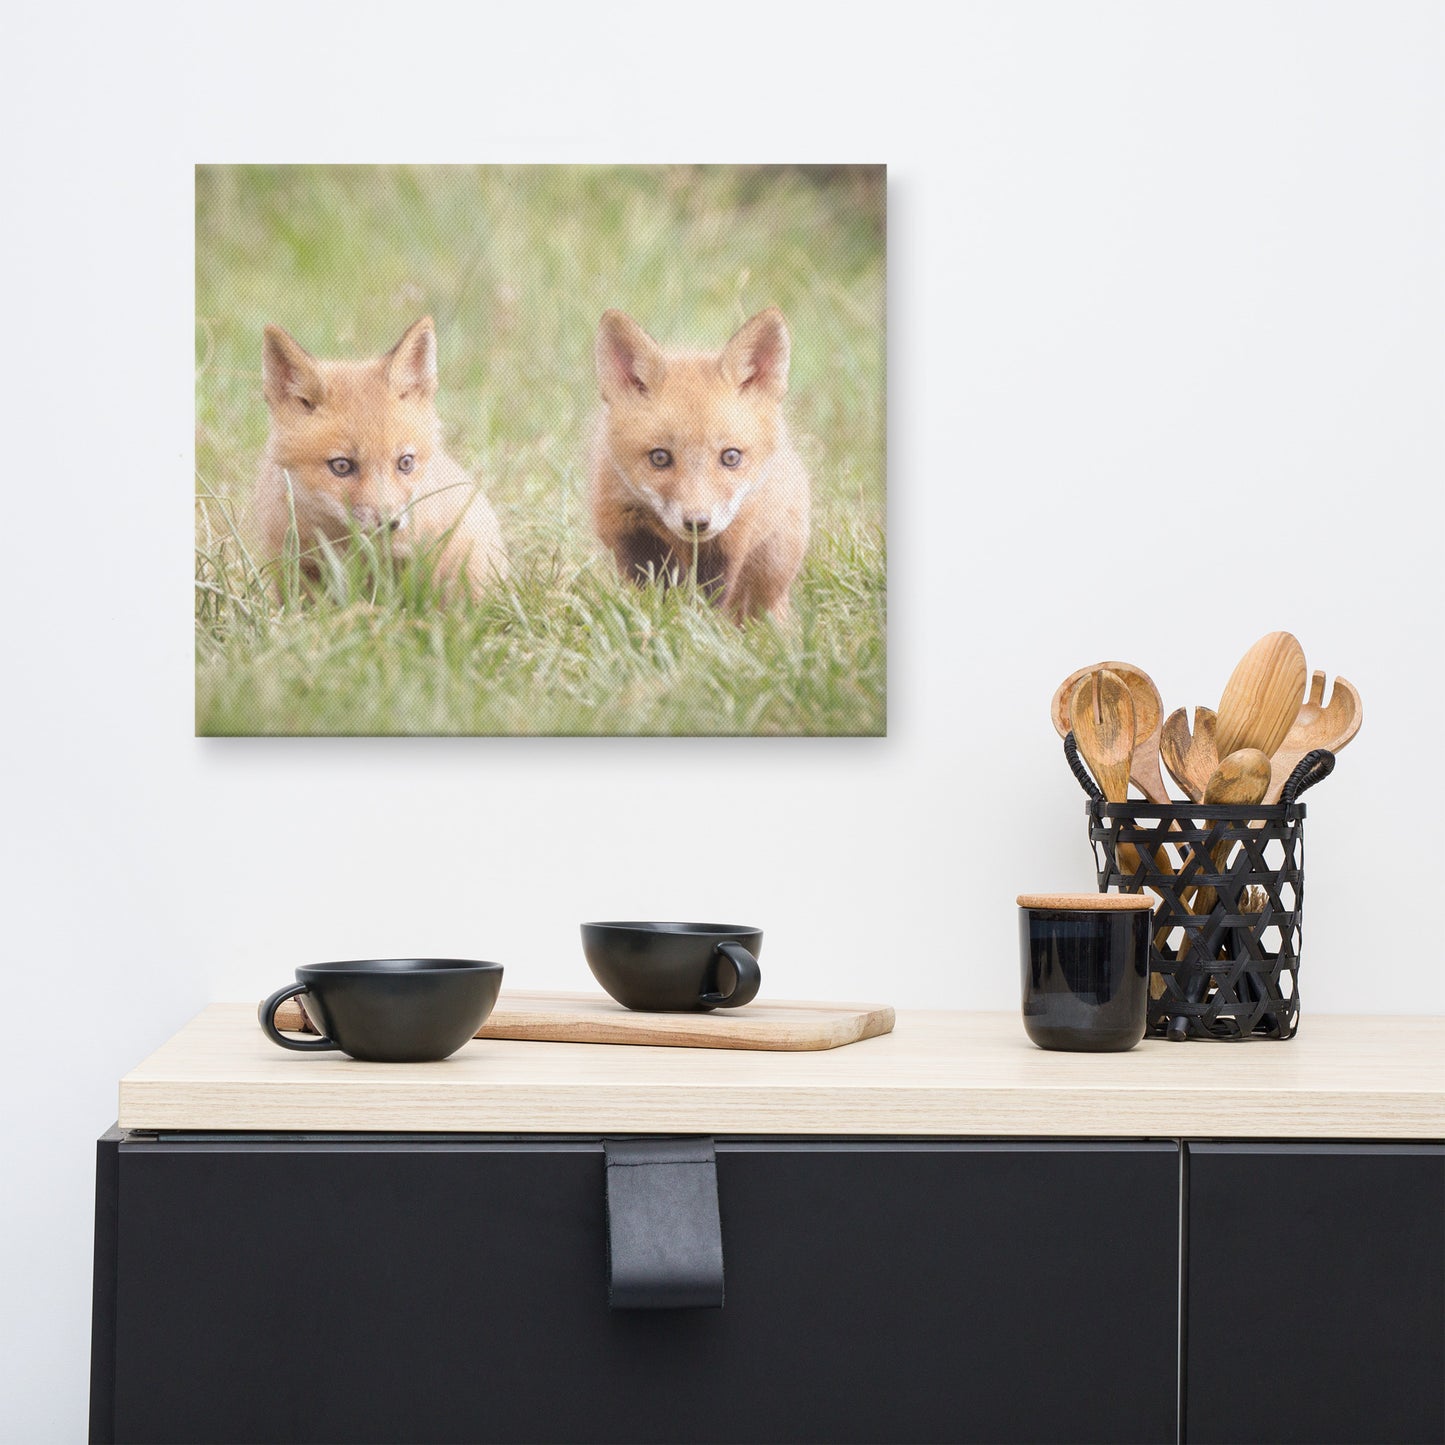 Baby Red Foxes Learning to Hunt Animal / Wildlife Photograph Canvas Wall Art Prints